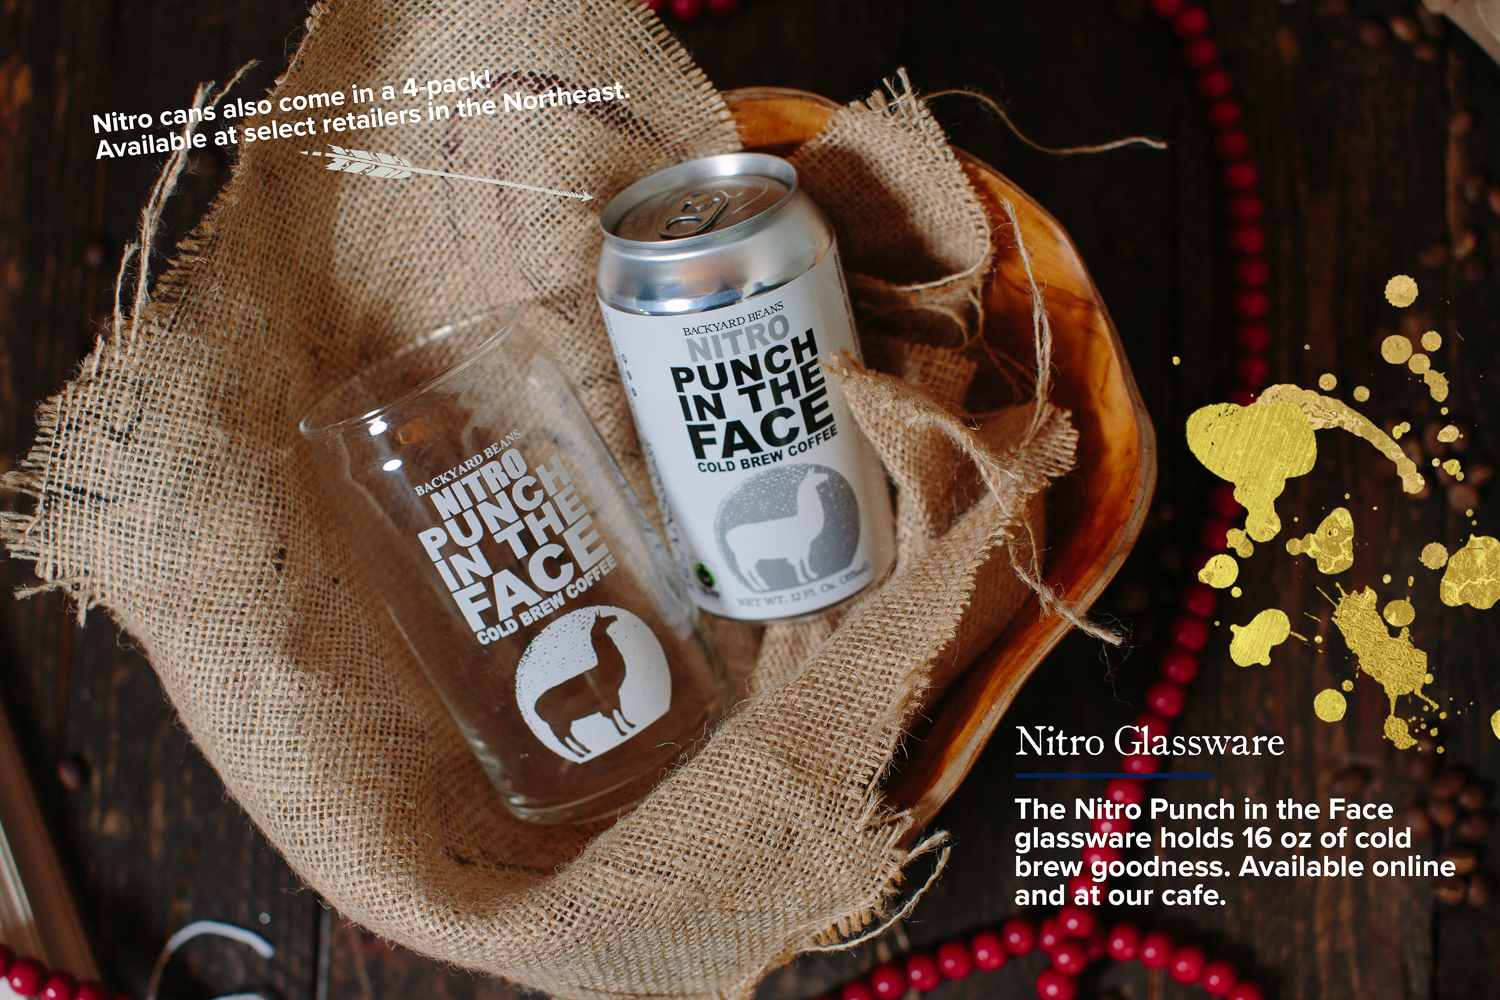 Image of Punch in the Face drinking glass and nitro can